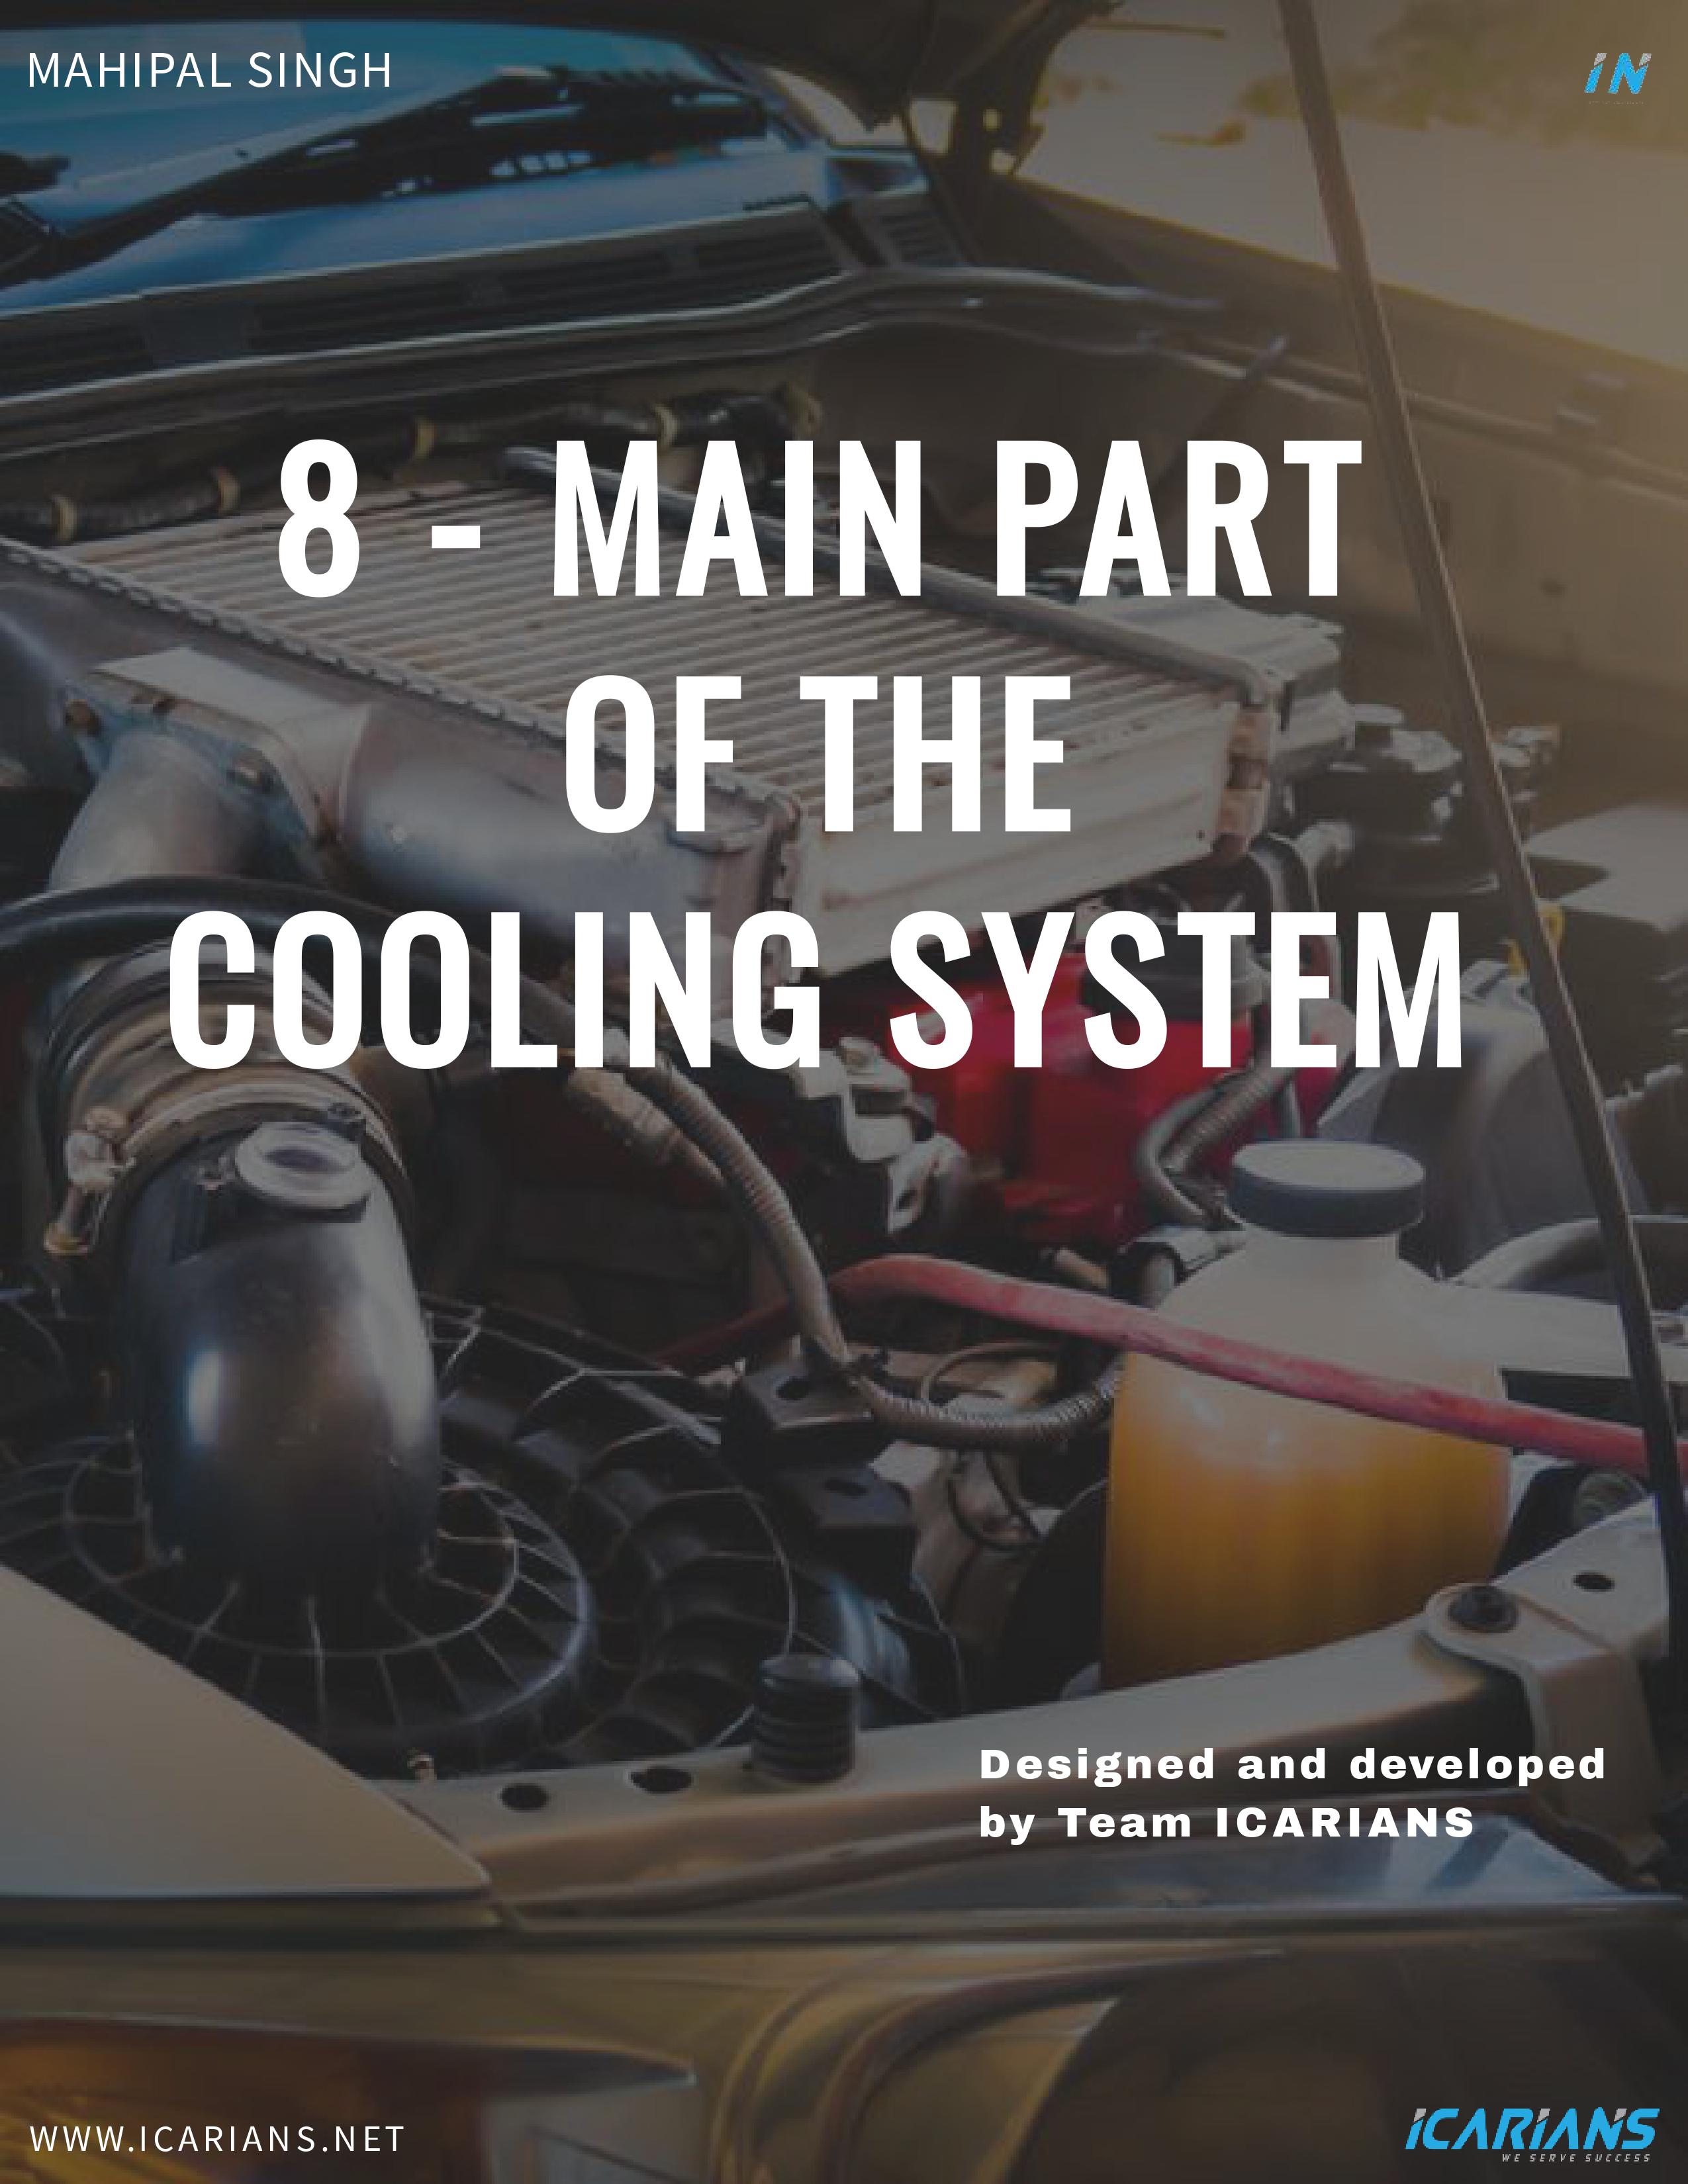 8 - MAIN PART OF THE COOLING SYSTEM